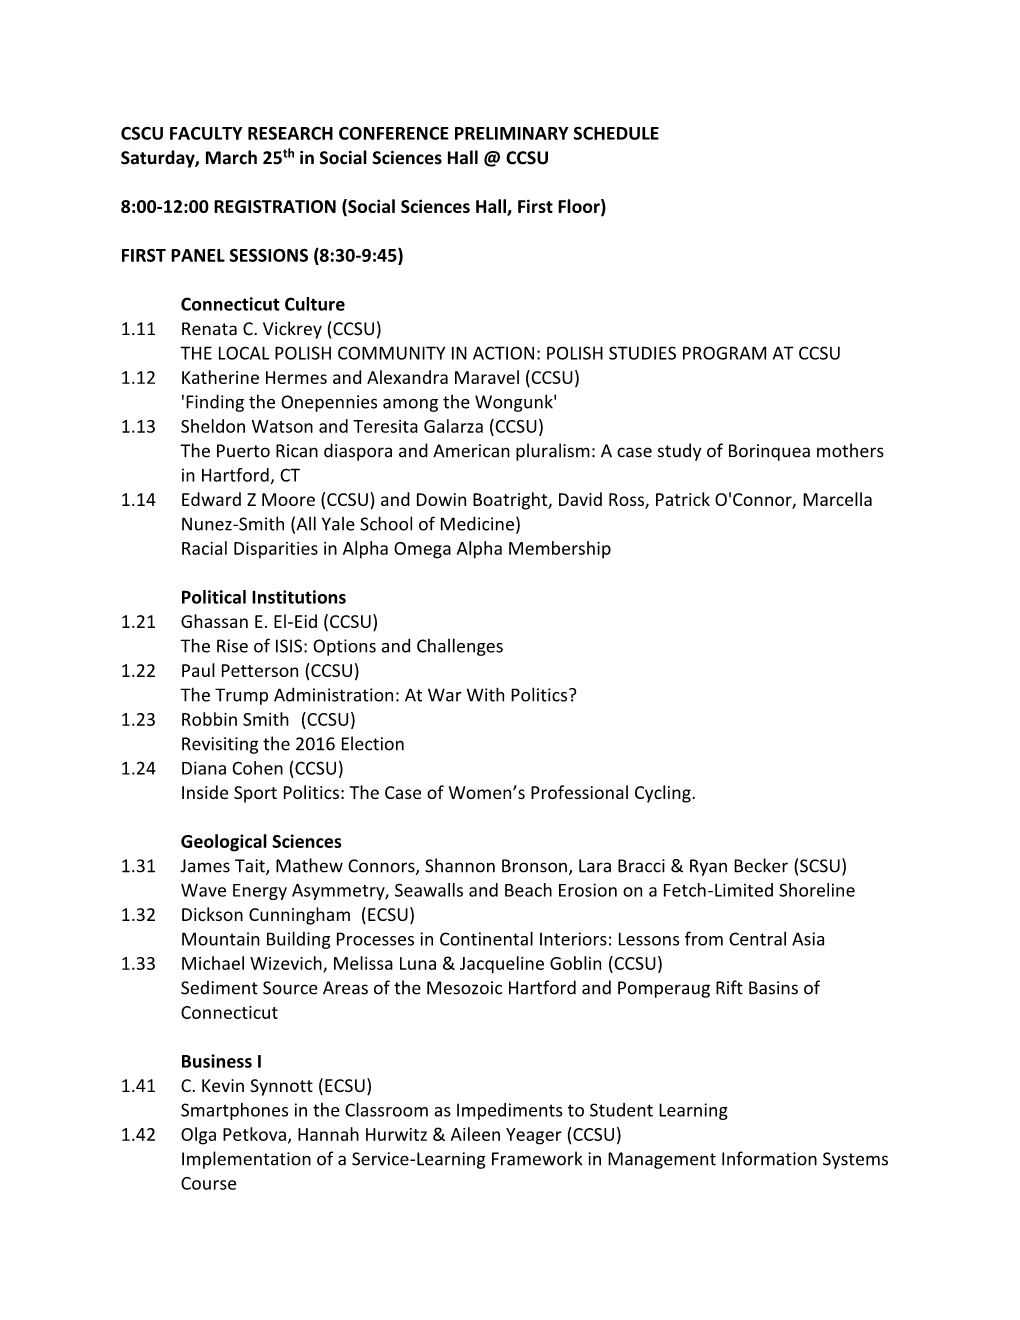 CSCU FACULTY RESEARCH CONFERENCE PRELIMINARY SCHEDULE Saturday, March 25Th in Social Sciences Hall @ CCSU